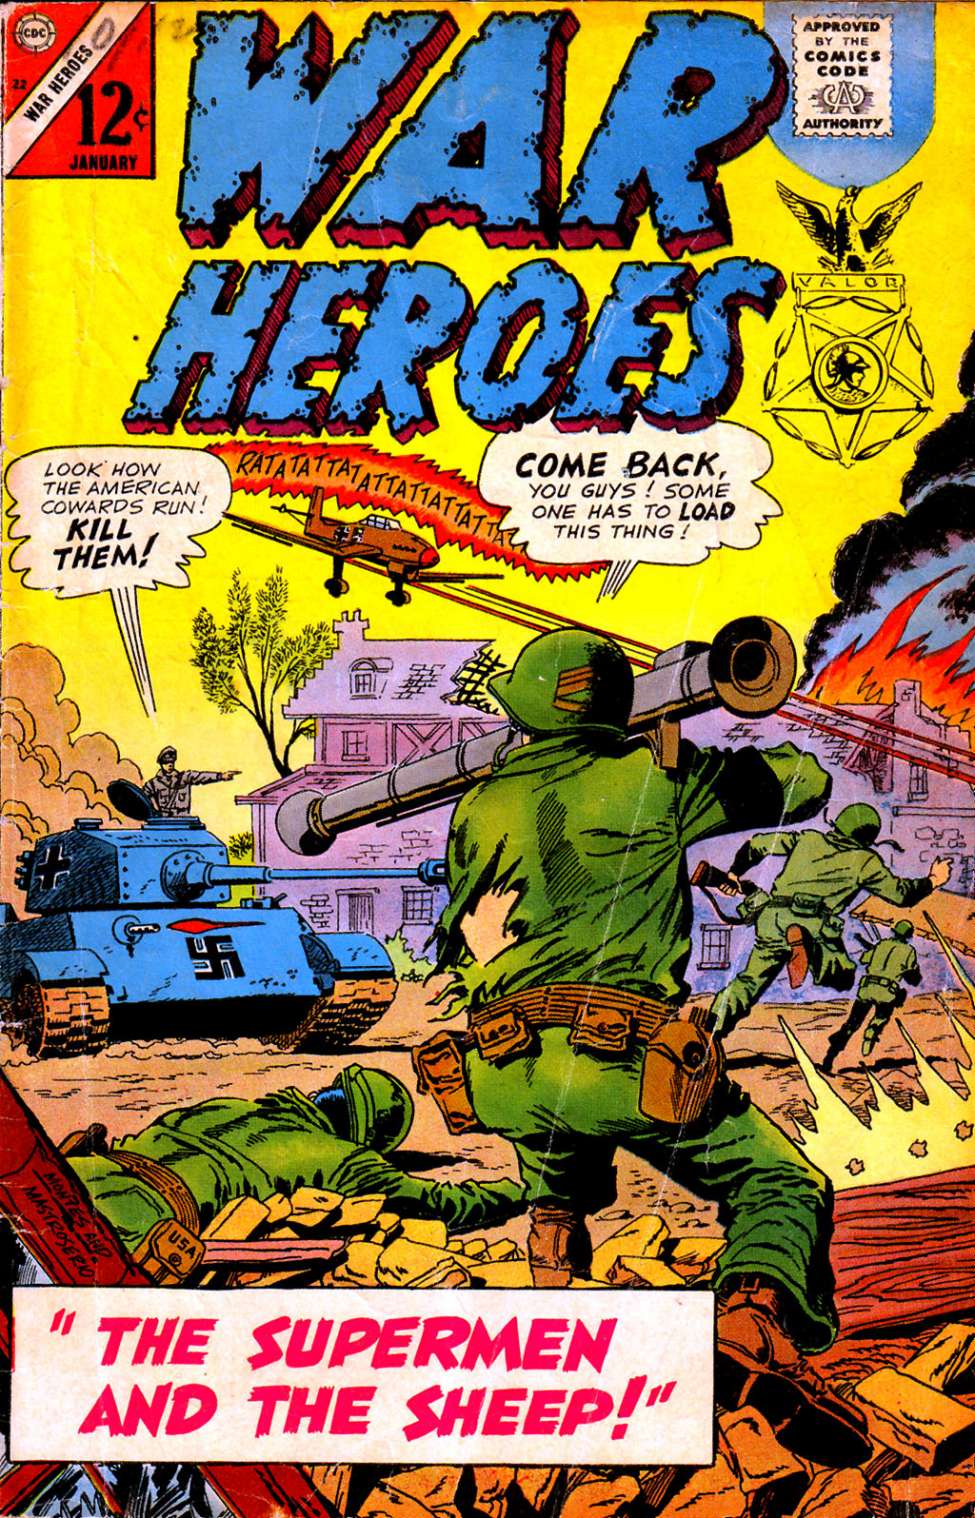 Book Cover For War Heroes 22 - Version 1